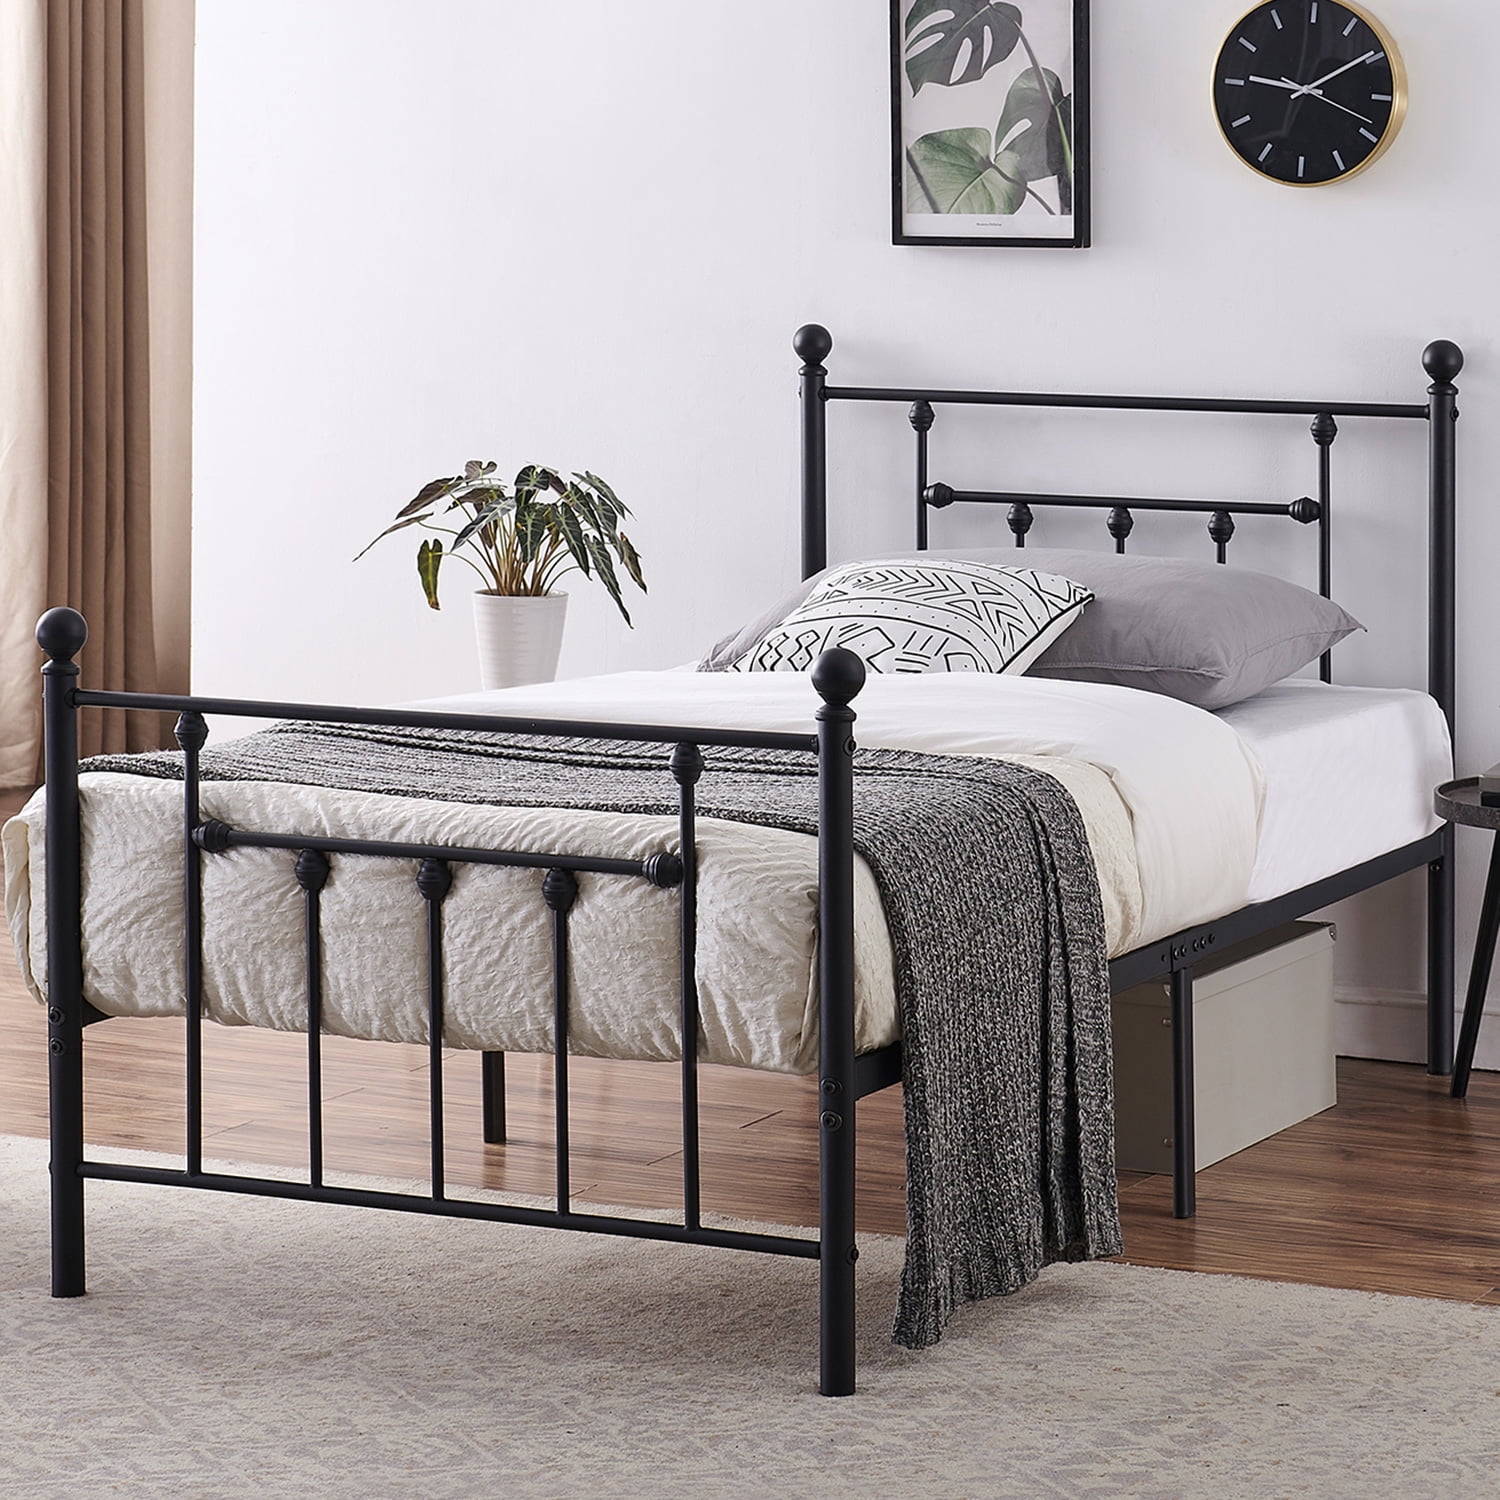 Twin Size Antique Bed Frame/Platform Bed with Victorian Iron Headboard